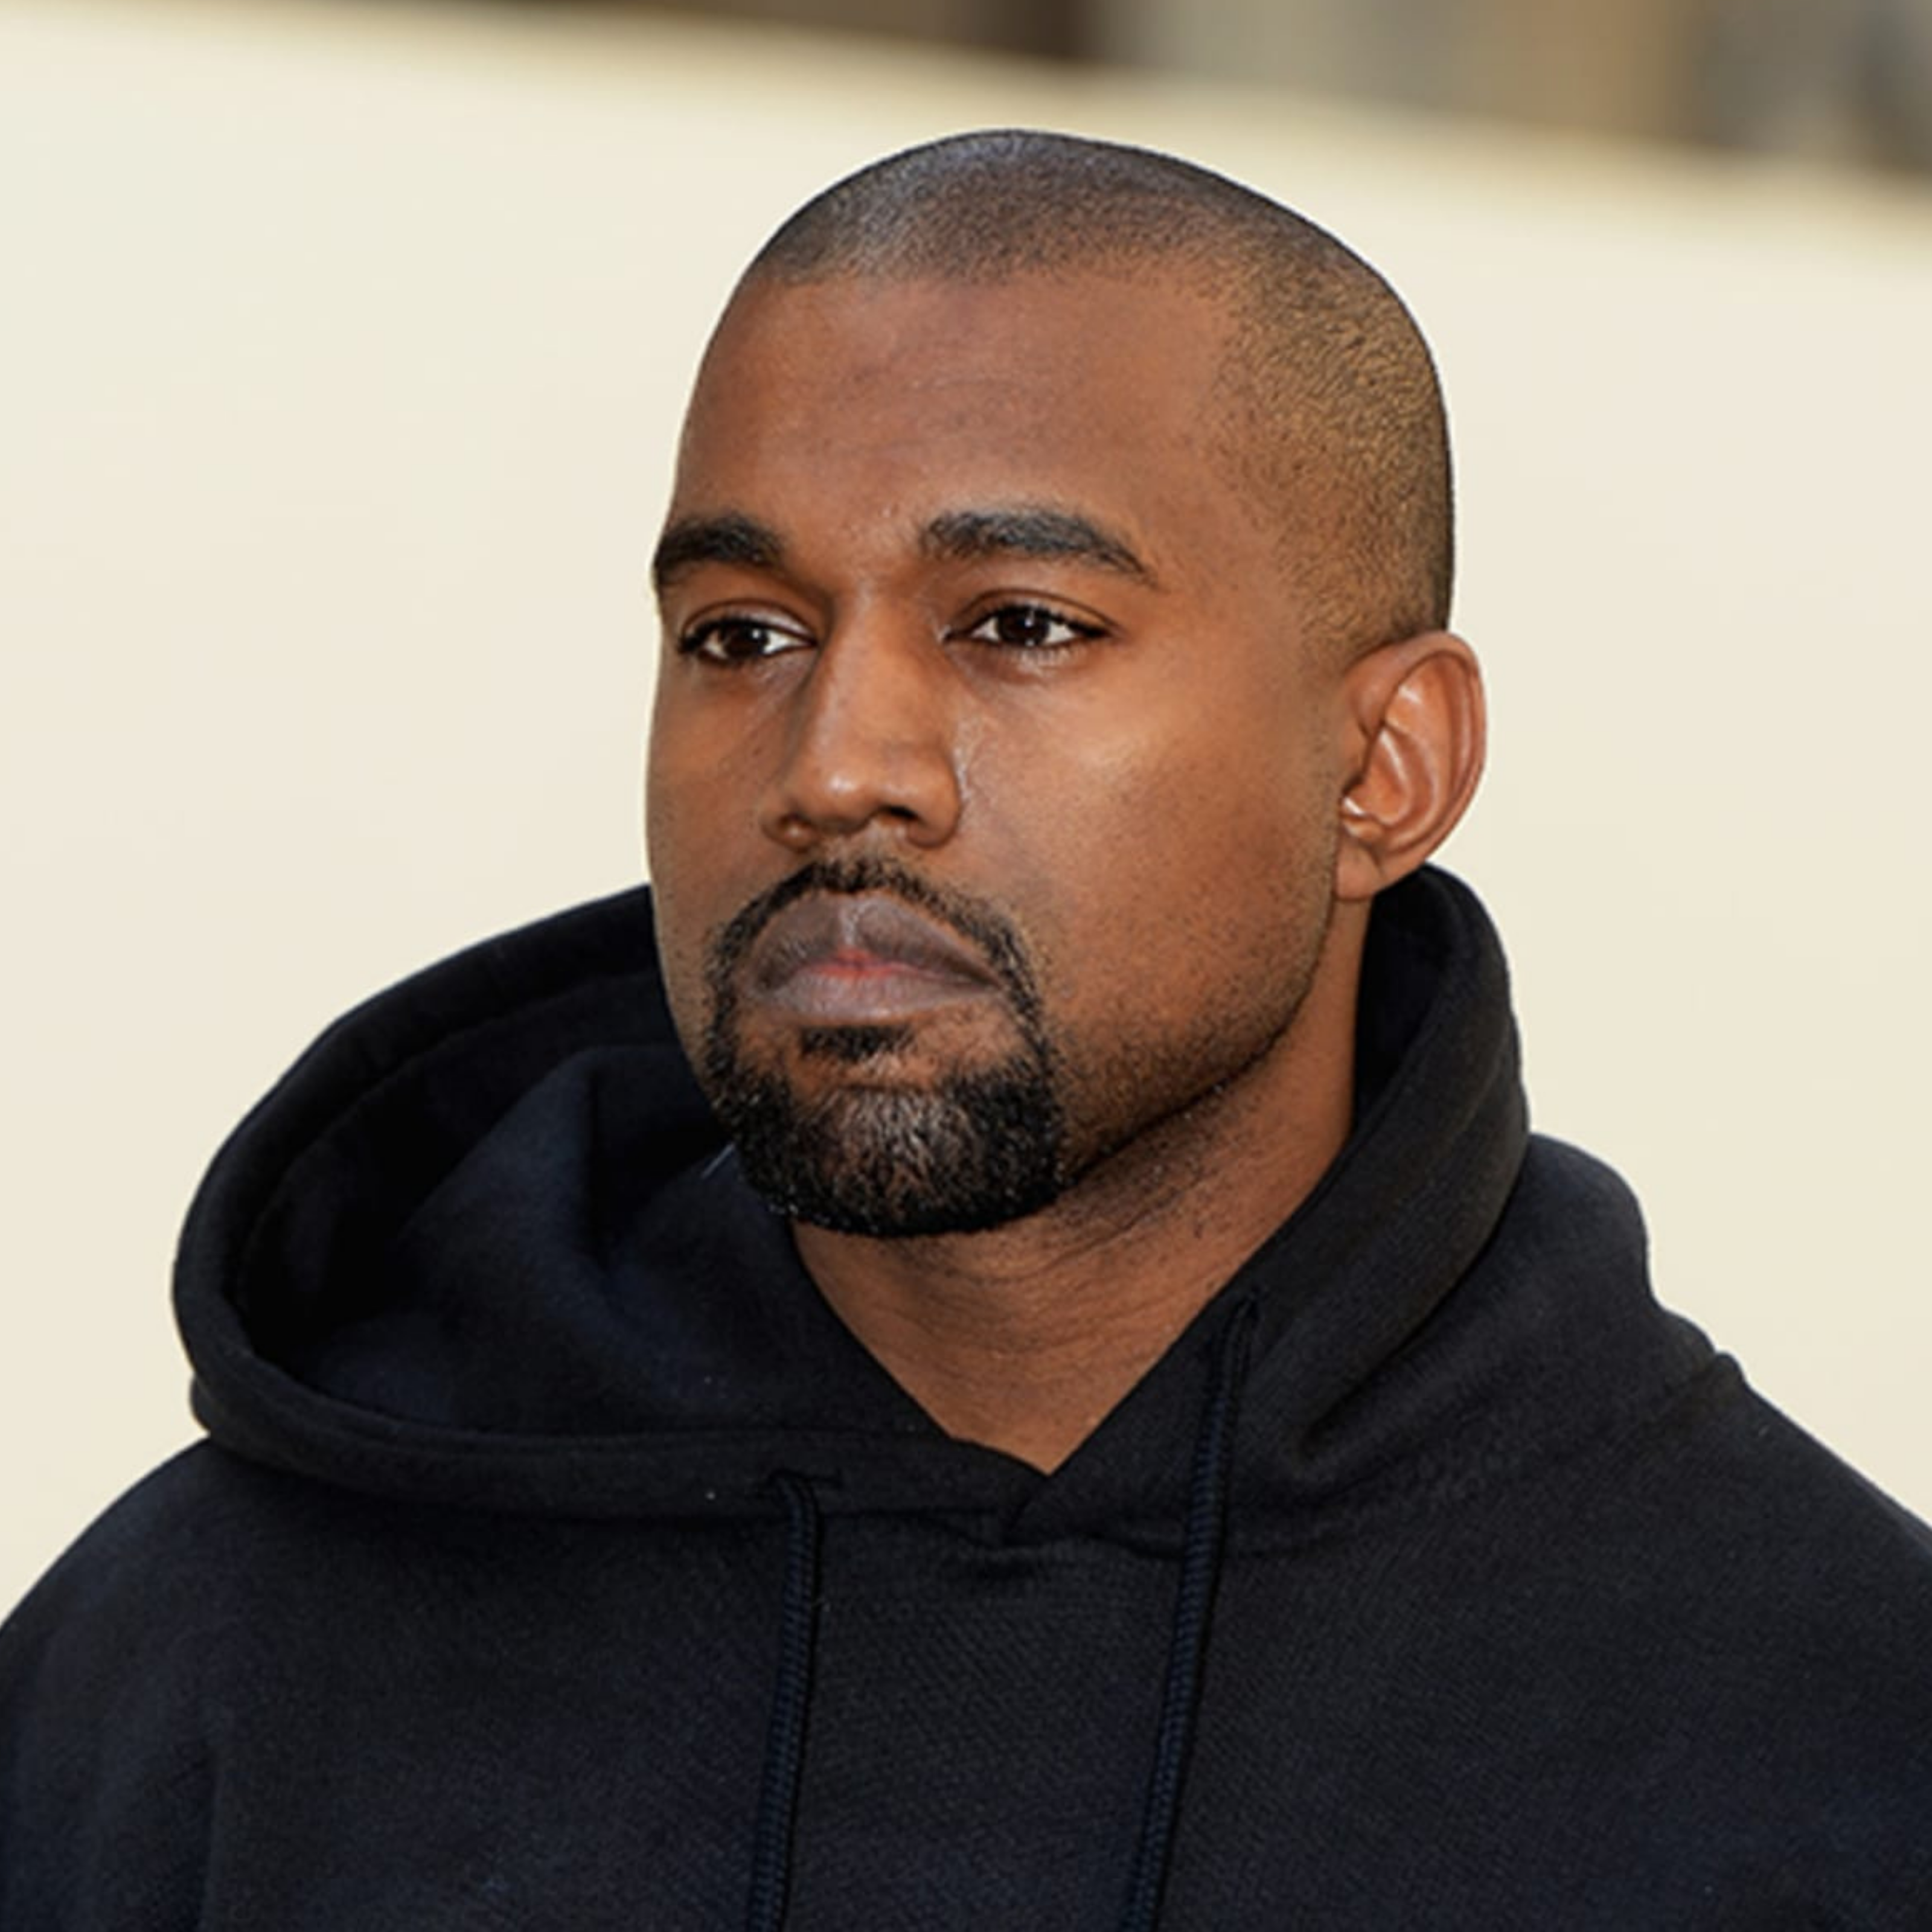 UNIVERSAL MUSIC GROUP RELEASED CONTROVERSIAL ALBUM DONDA WITHOUT KANYE WEST'S APPROVAL